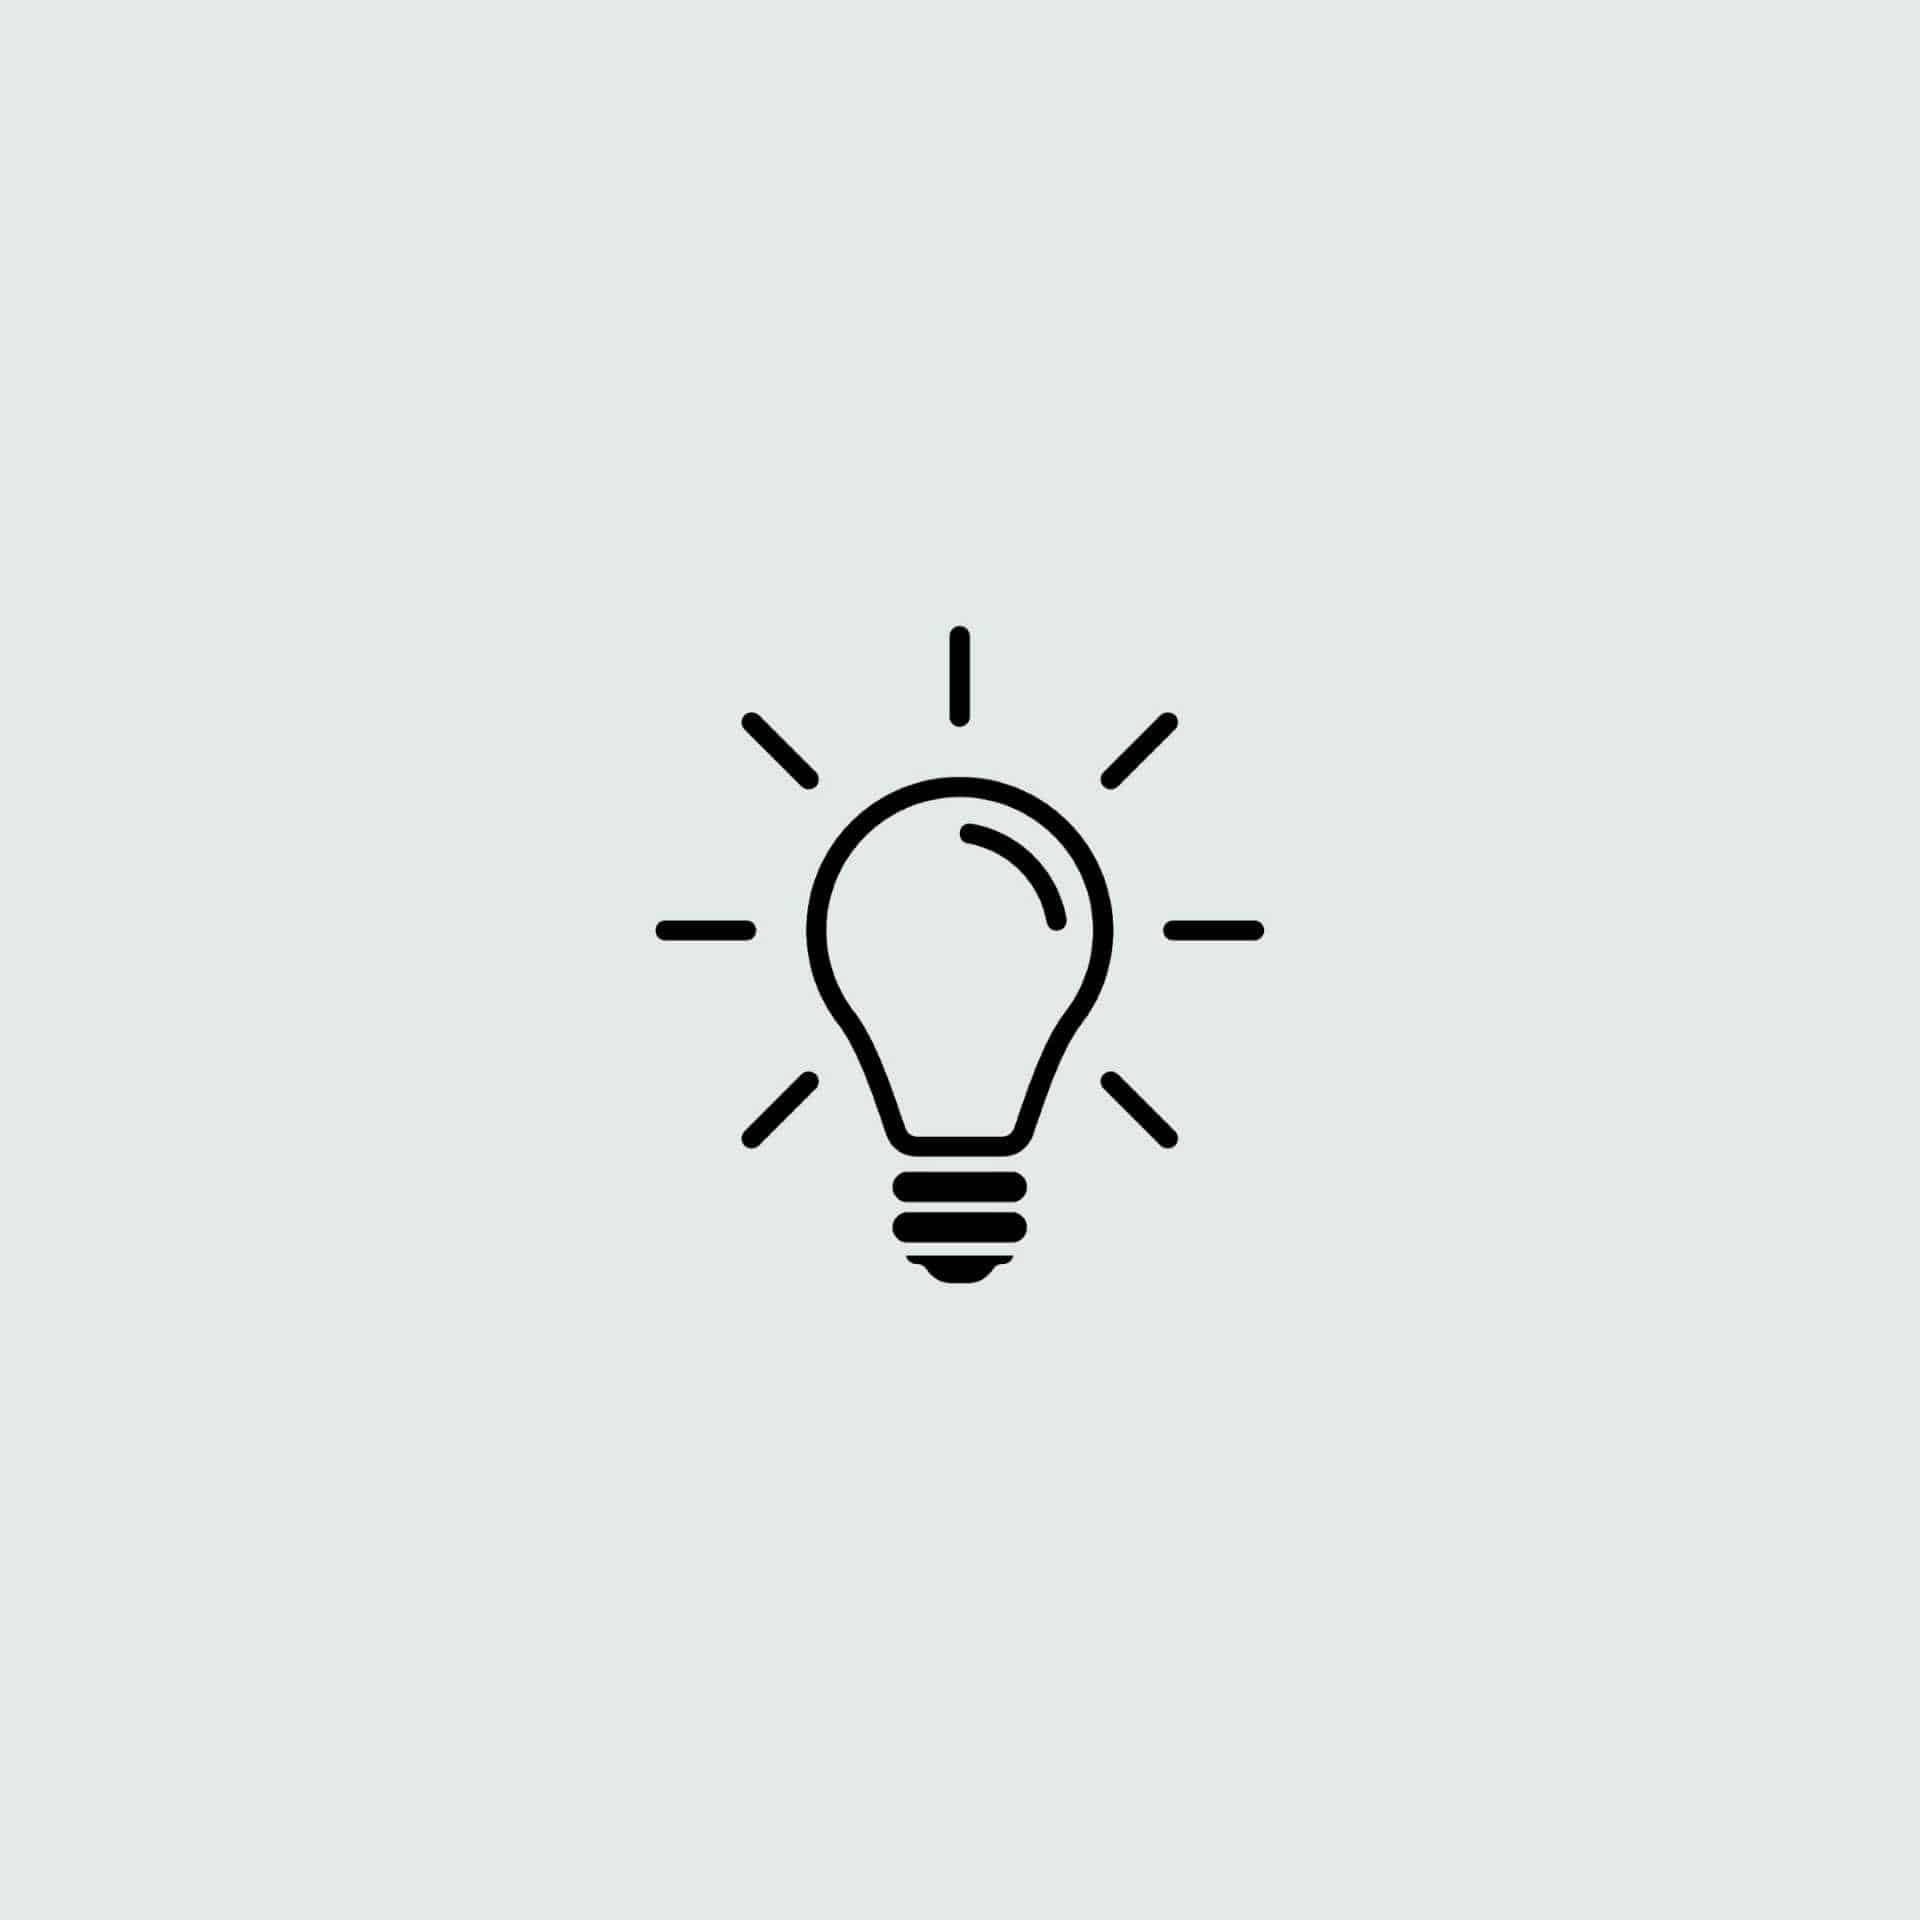 Graphic of a light bulb in black on a light background